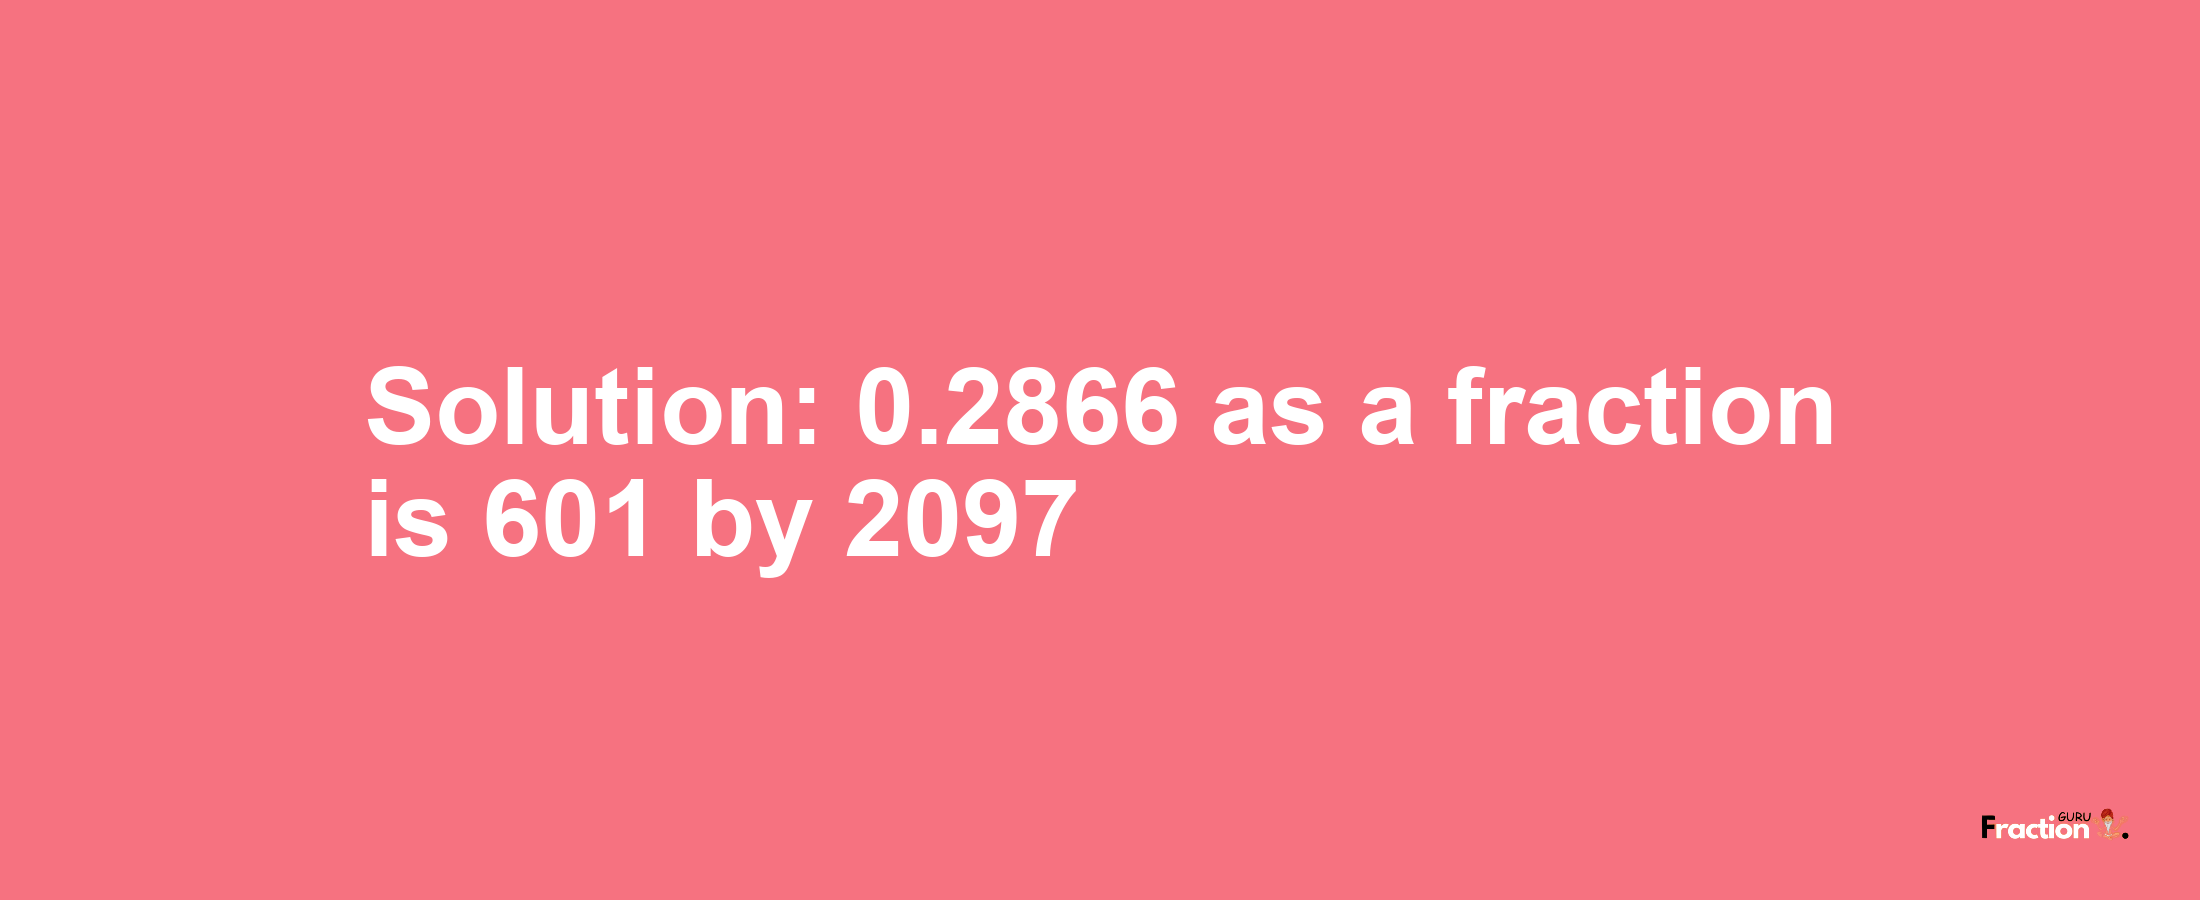 Solution:0.2866 as a fraction is 601/2097